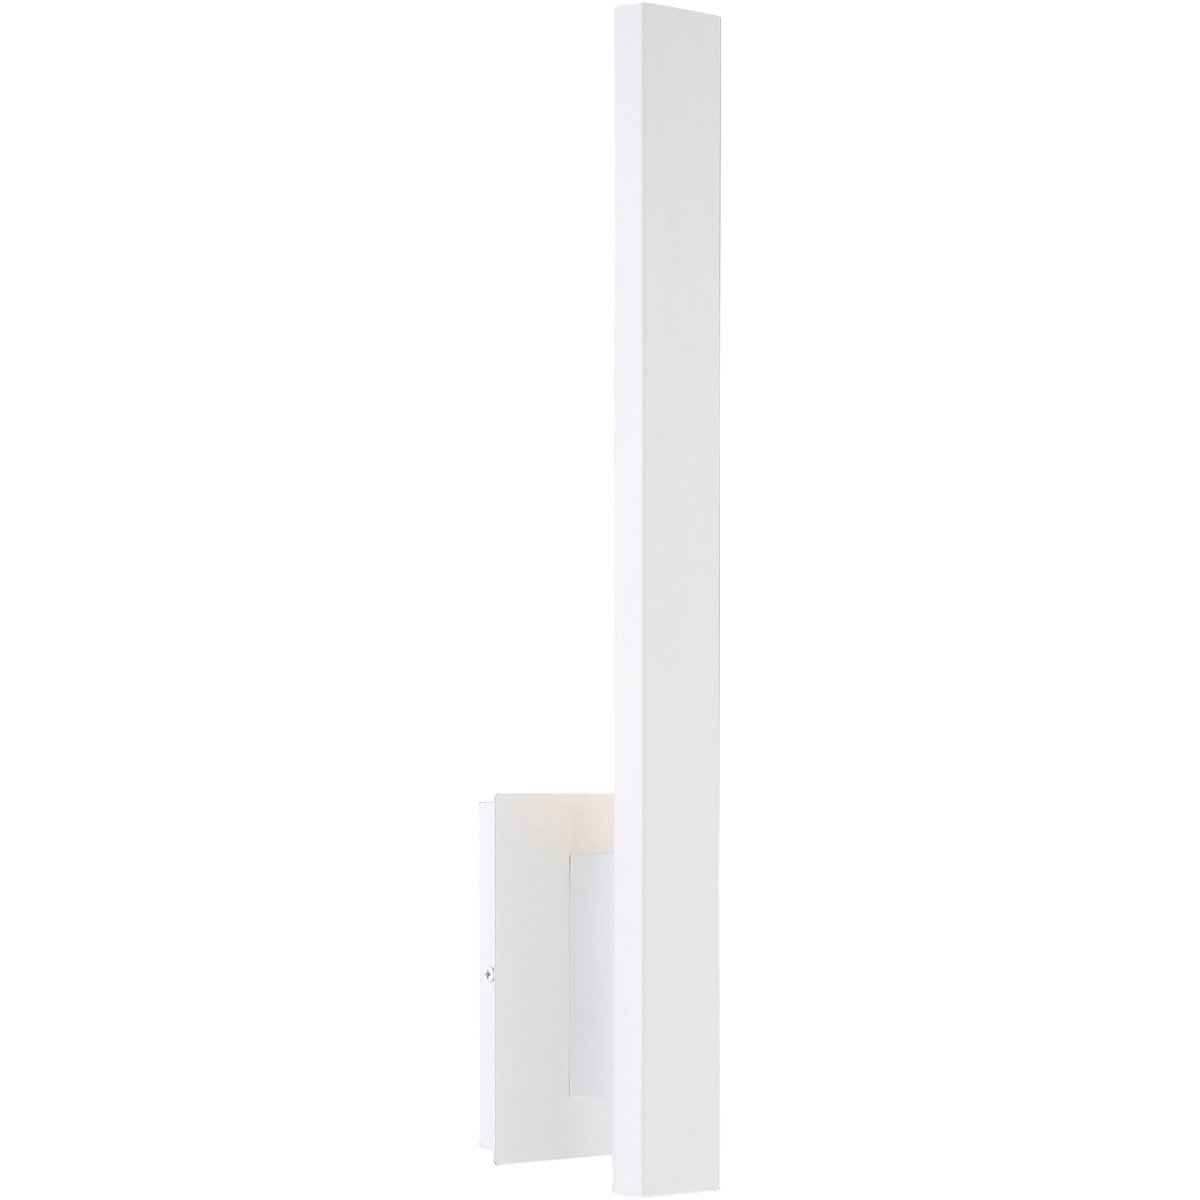 mengcaca LED Wall Sconces, Wall Mounted Reading Lights White with